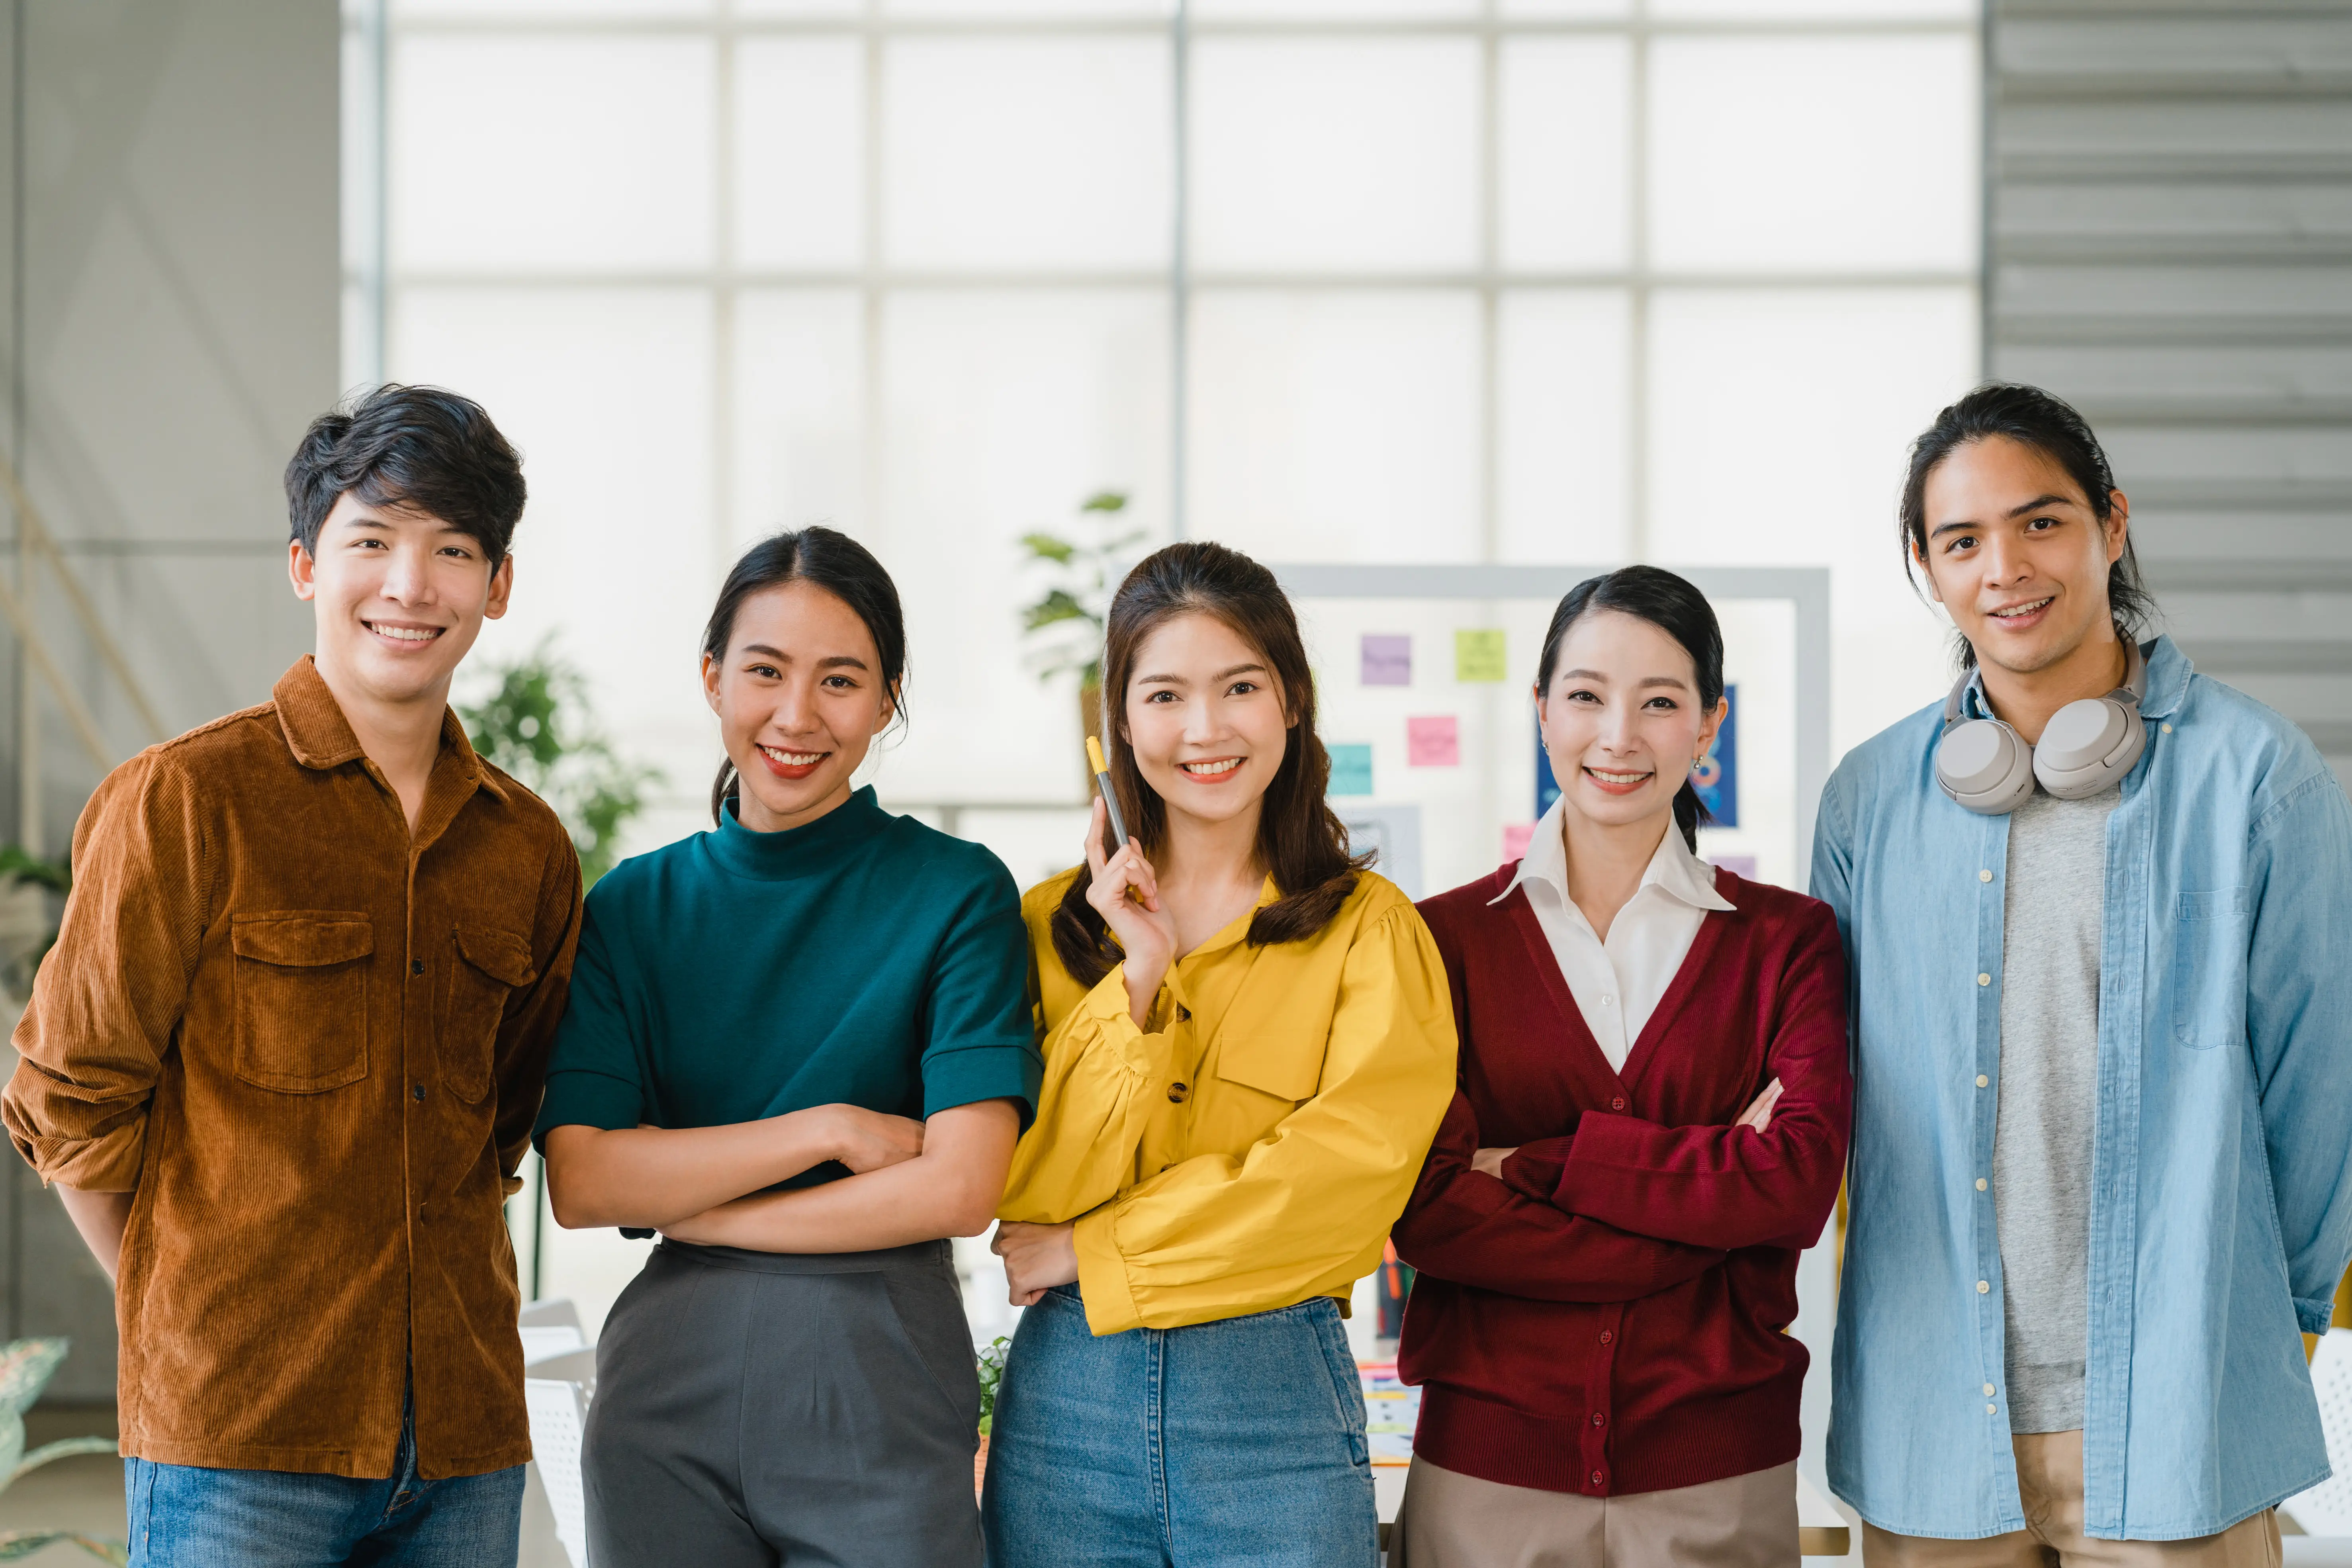 group-asia-young-creative-people-smart-casual-wear-smiling-arms-crossed-creative-office-workplace-diverse-asian-male-female-stand-together-startup-coworker-teamwork-concept (1)